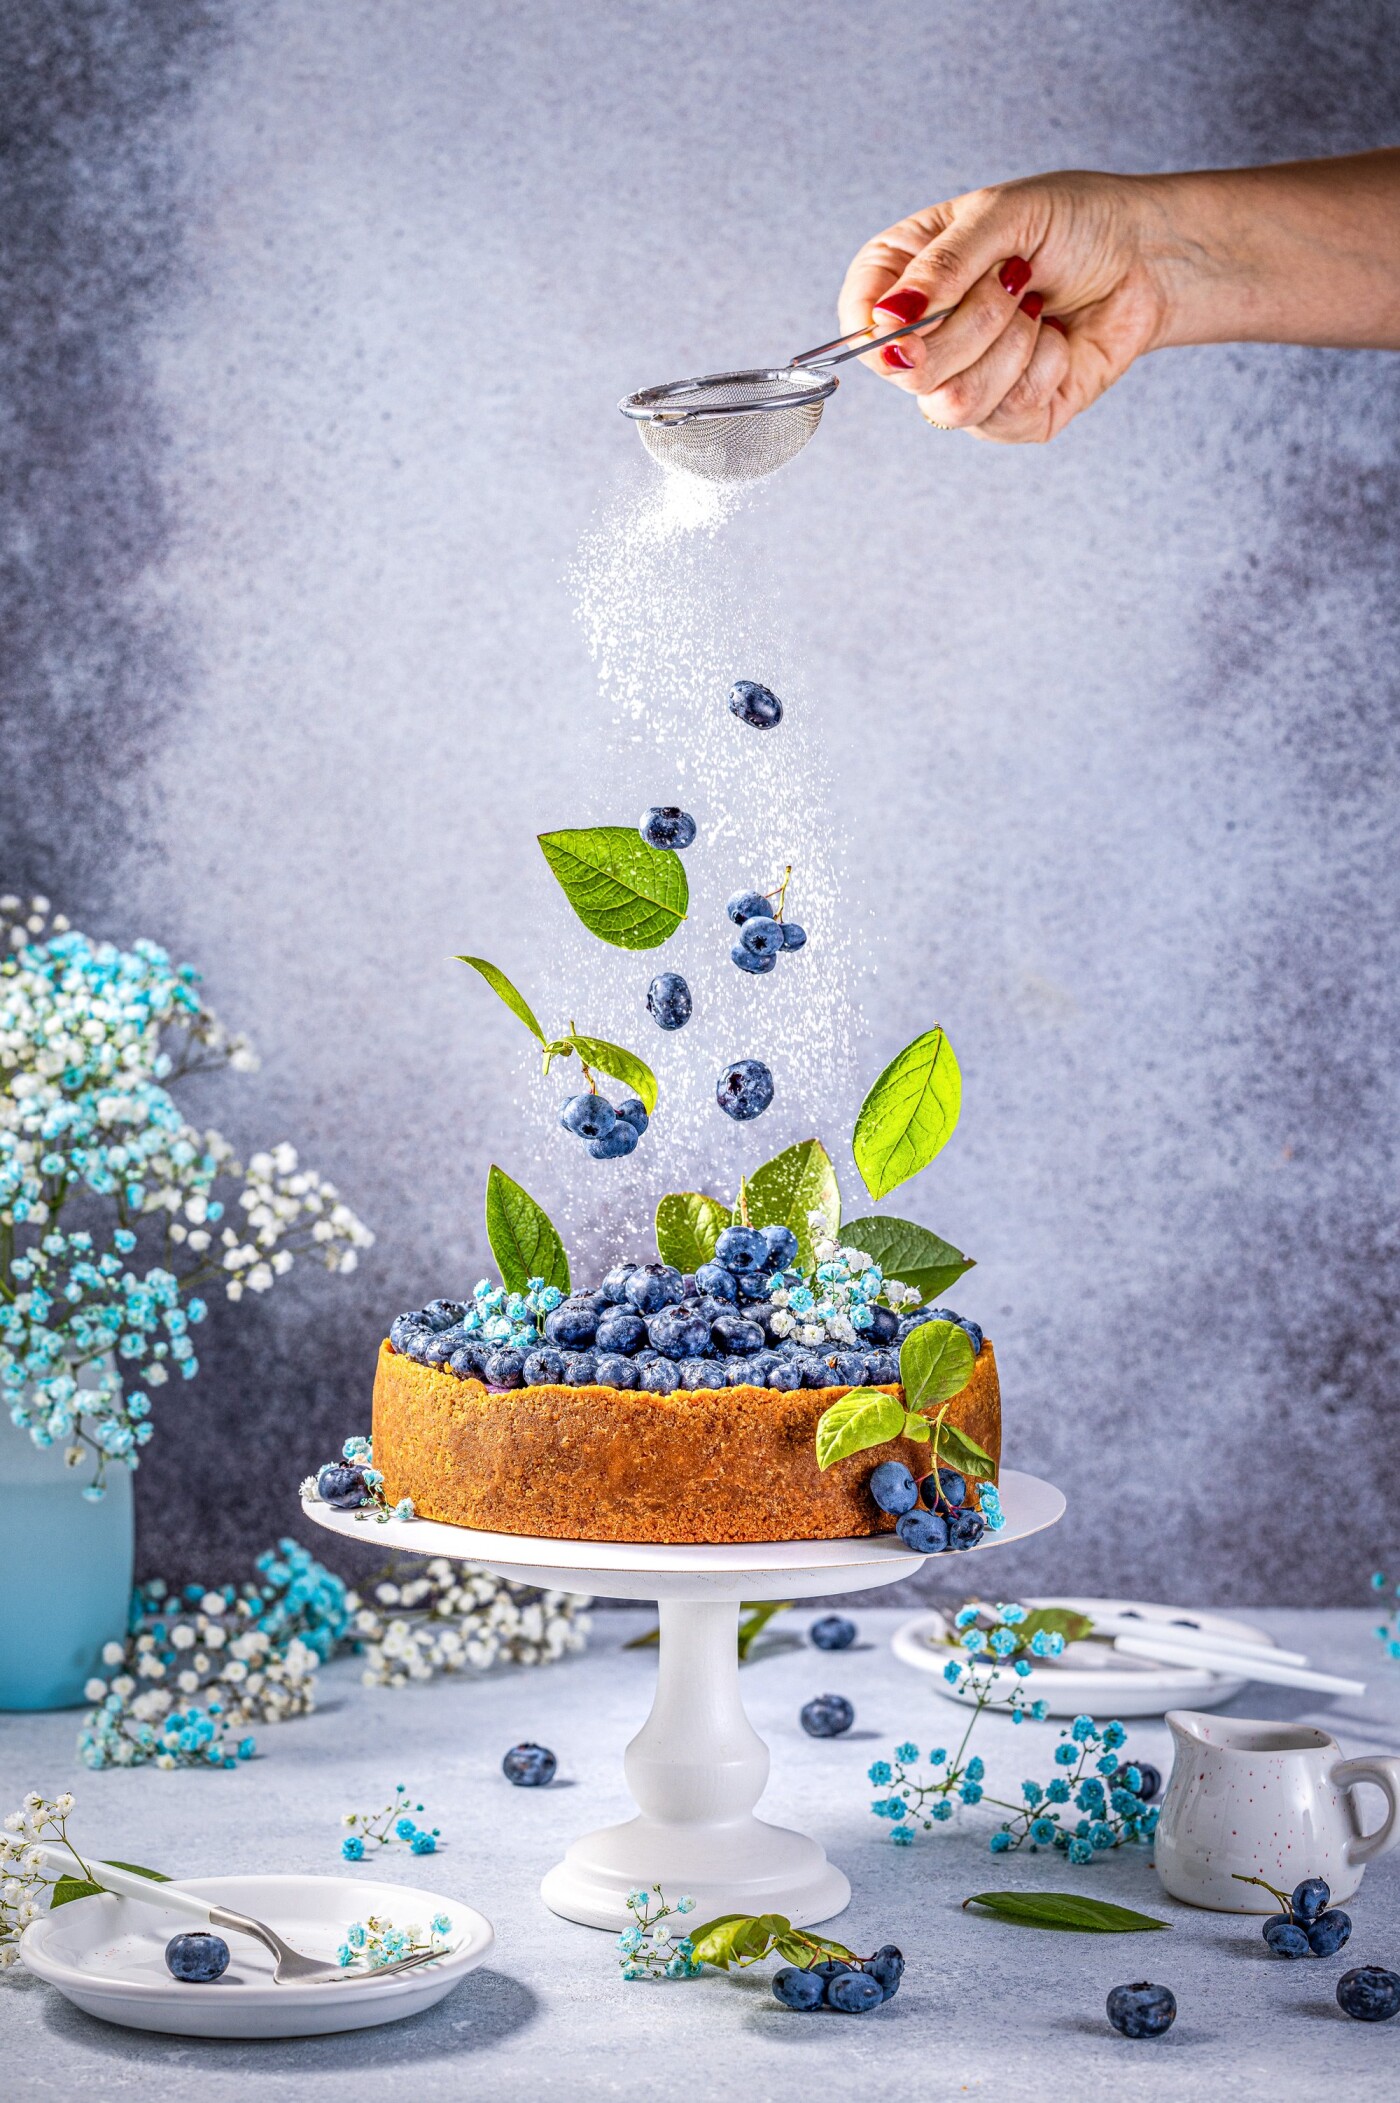 Sweet creamy blueberry cheesecake with fresh blueberries and whipped cream. Shooting for pâtisserie,...